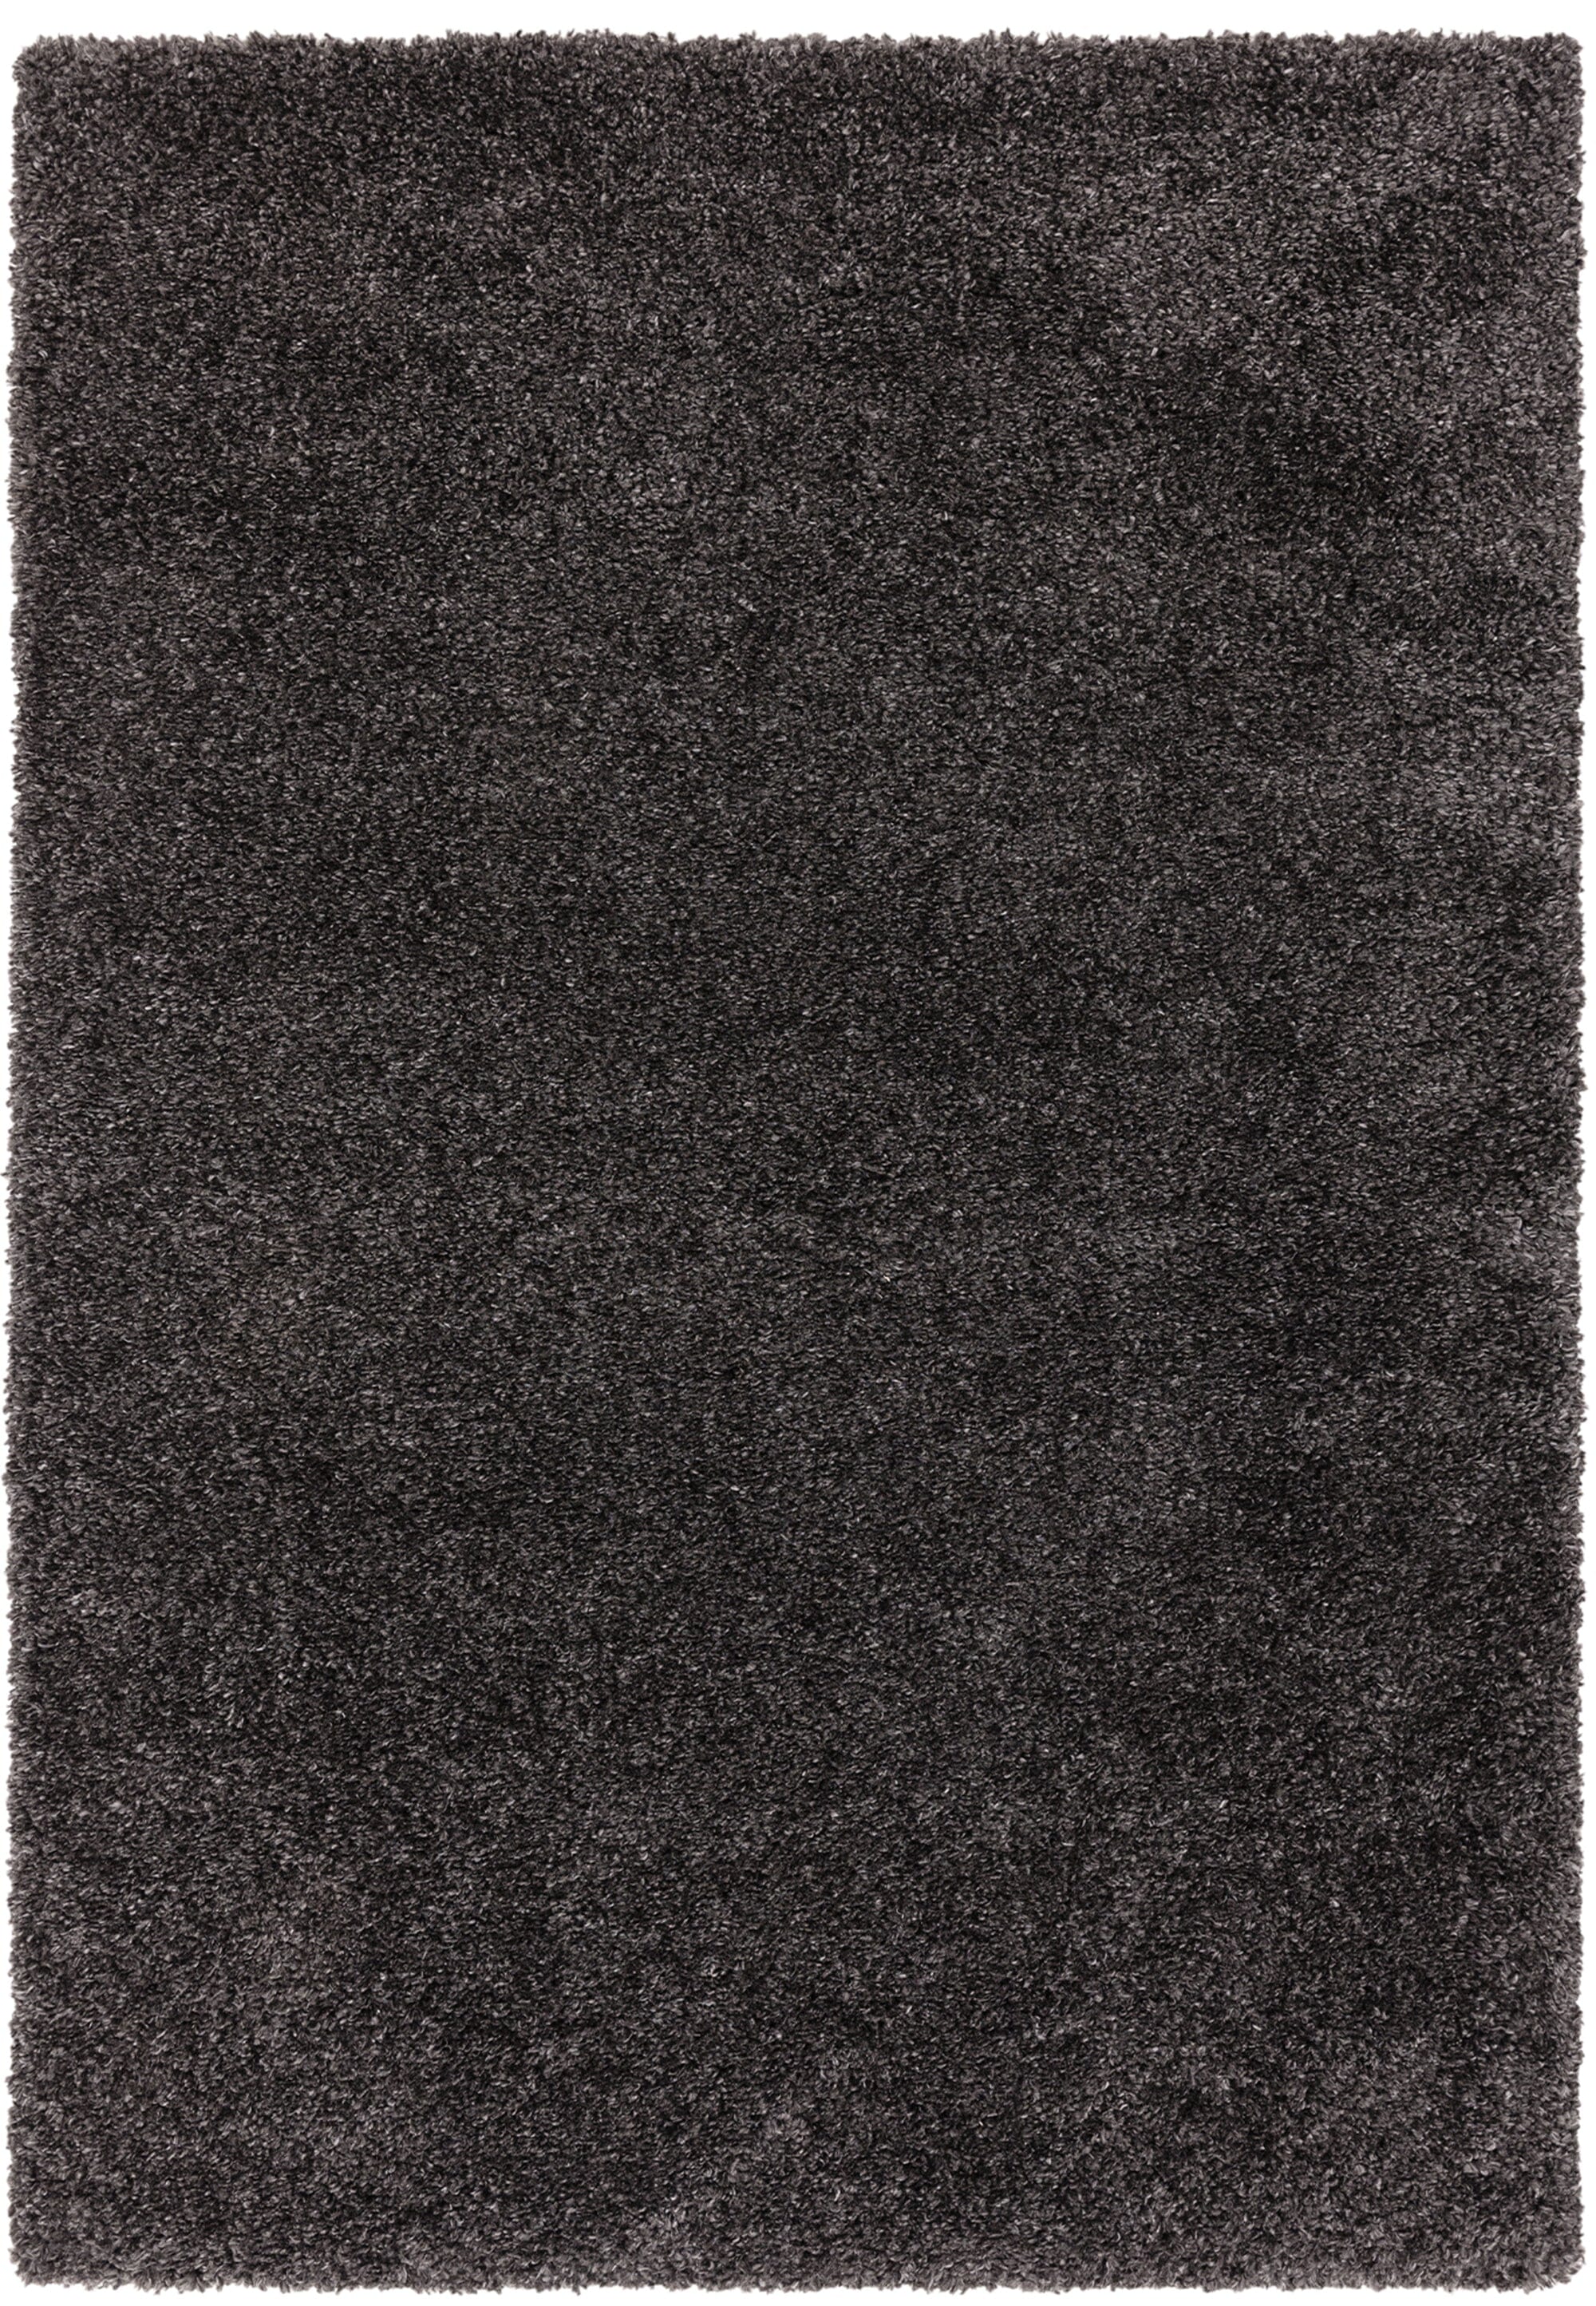 Ritchie Charcoal Soft Touch Shaggy Rug